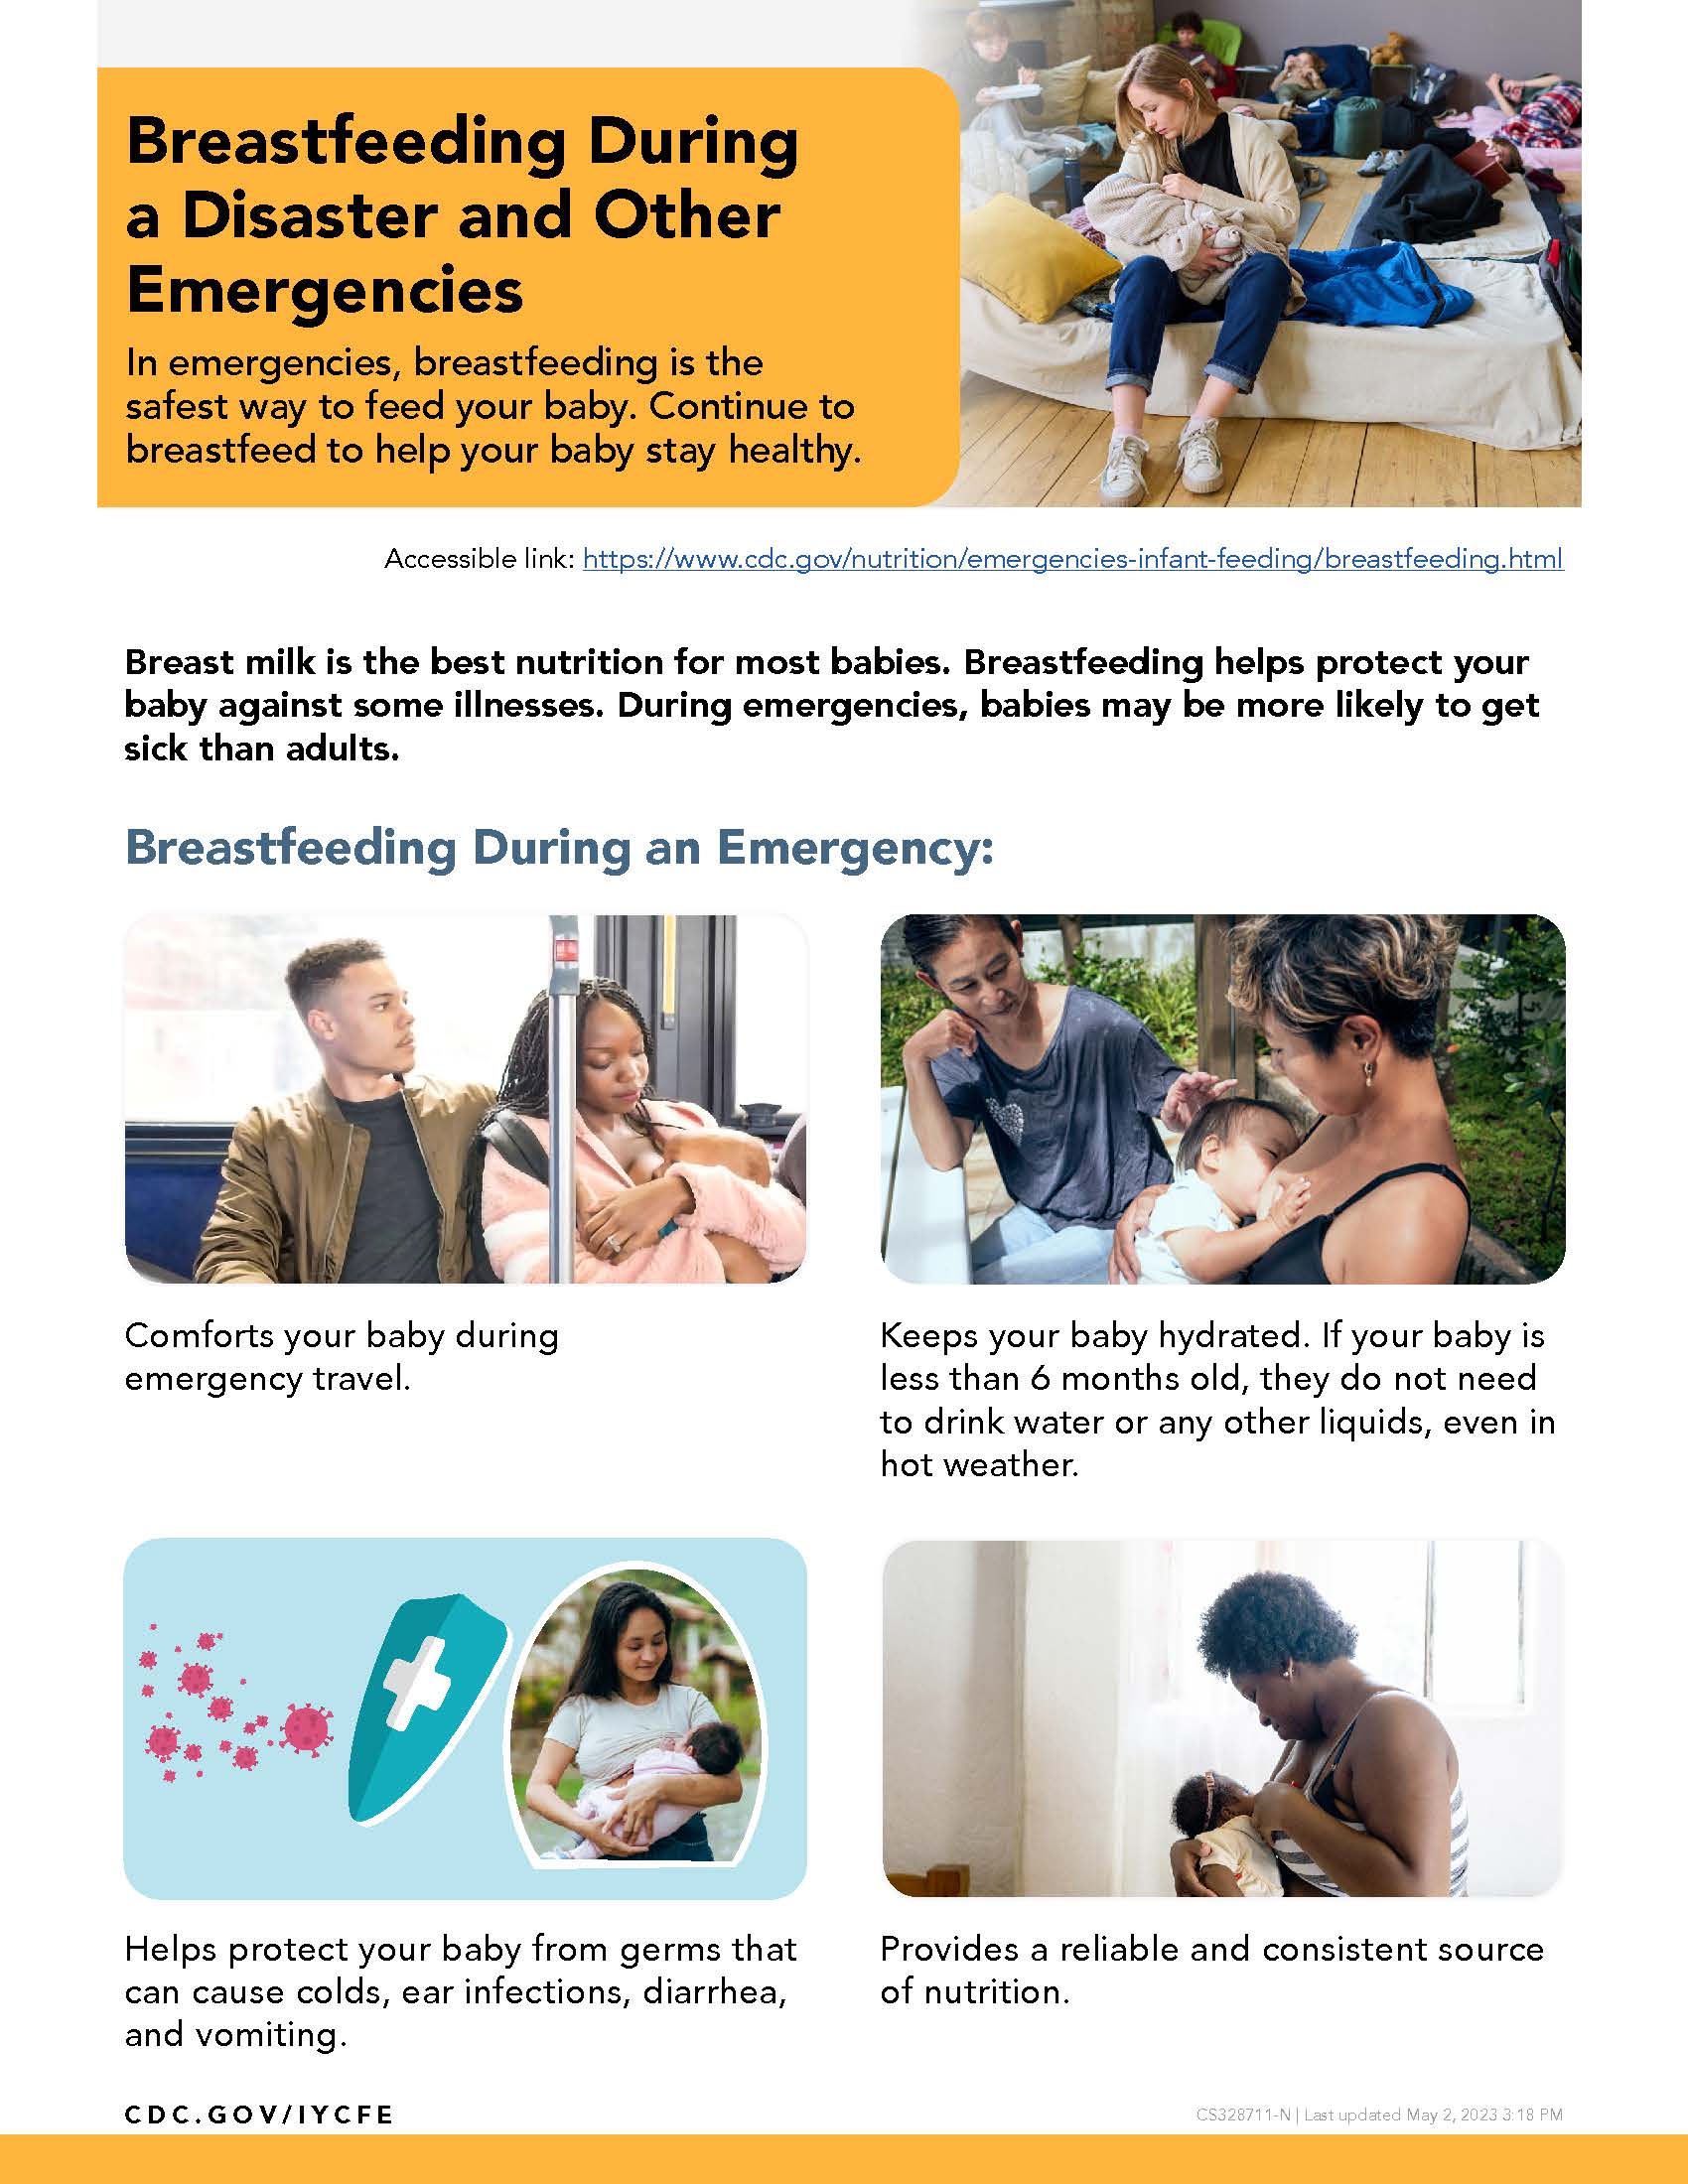 Breastfeeding During a Disaster and Other Emergencies